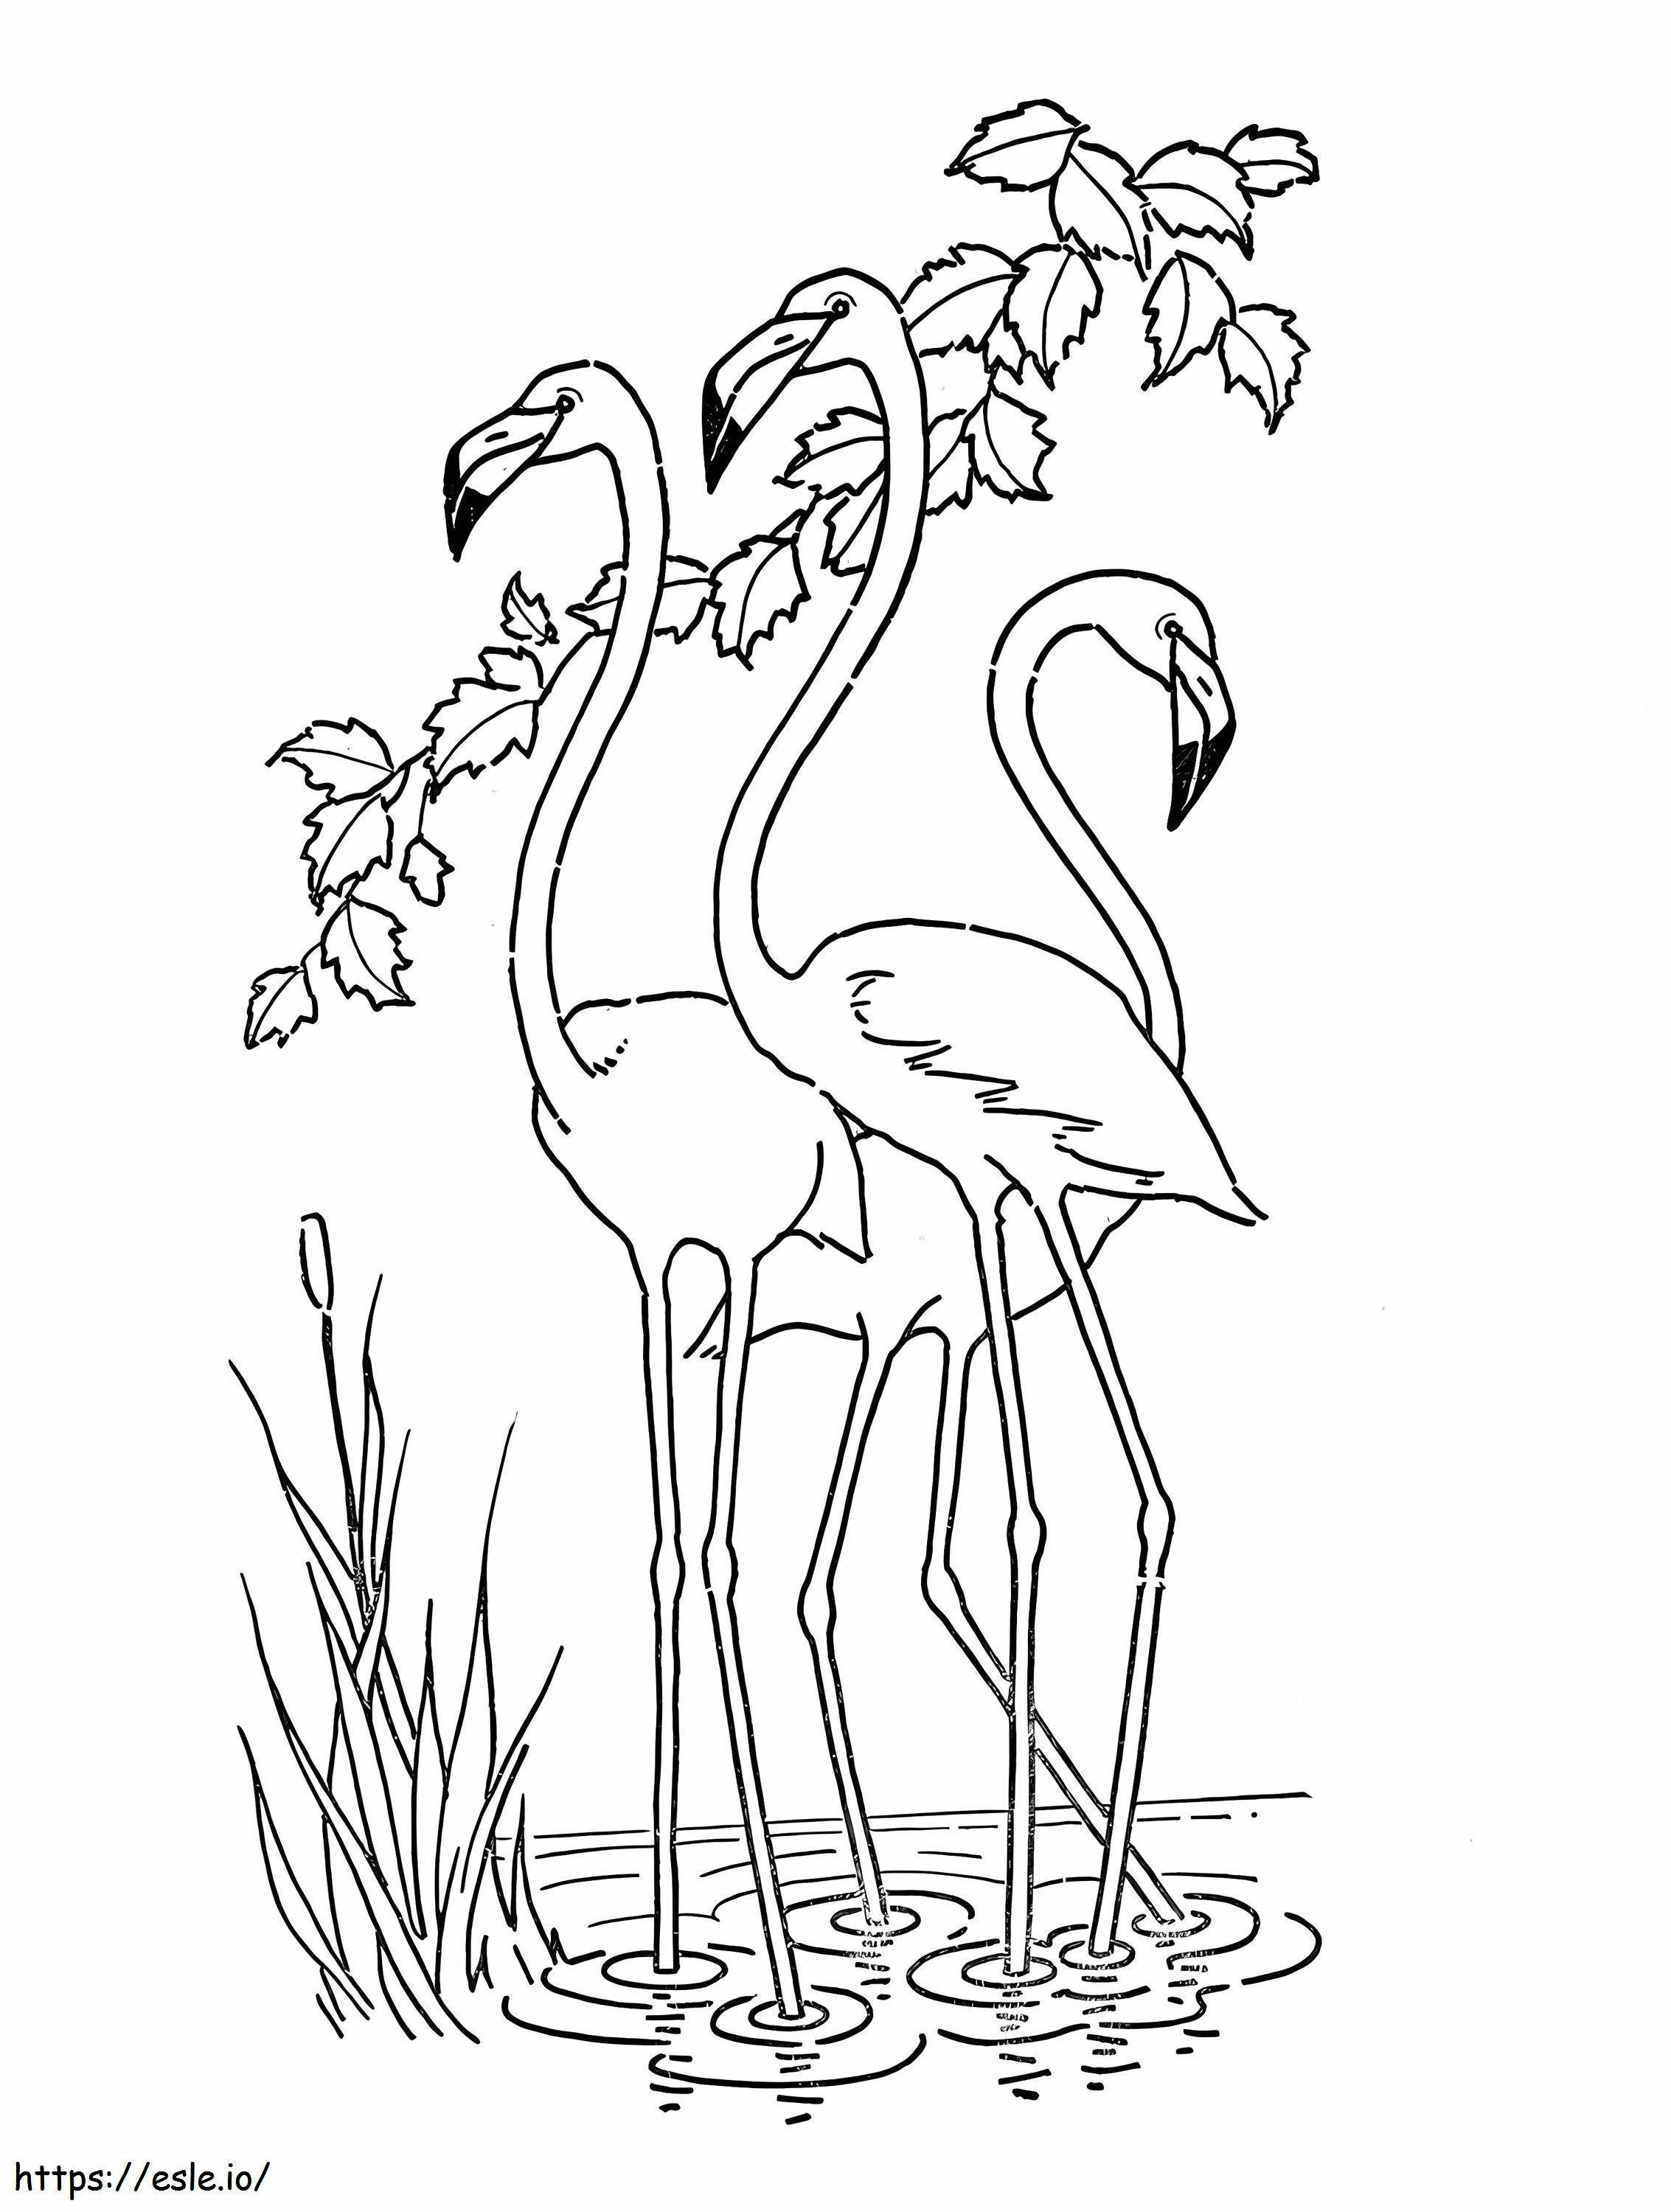 1548643418 D17A5B03Bd751E0Df622C28E60A610C9 For Kids Kids Coloring coloring page